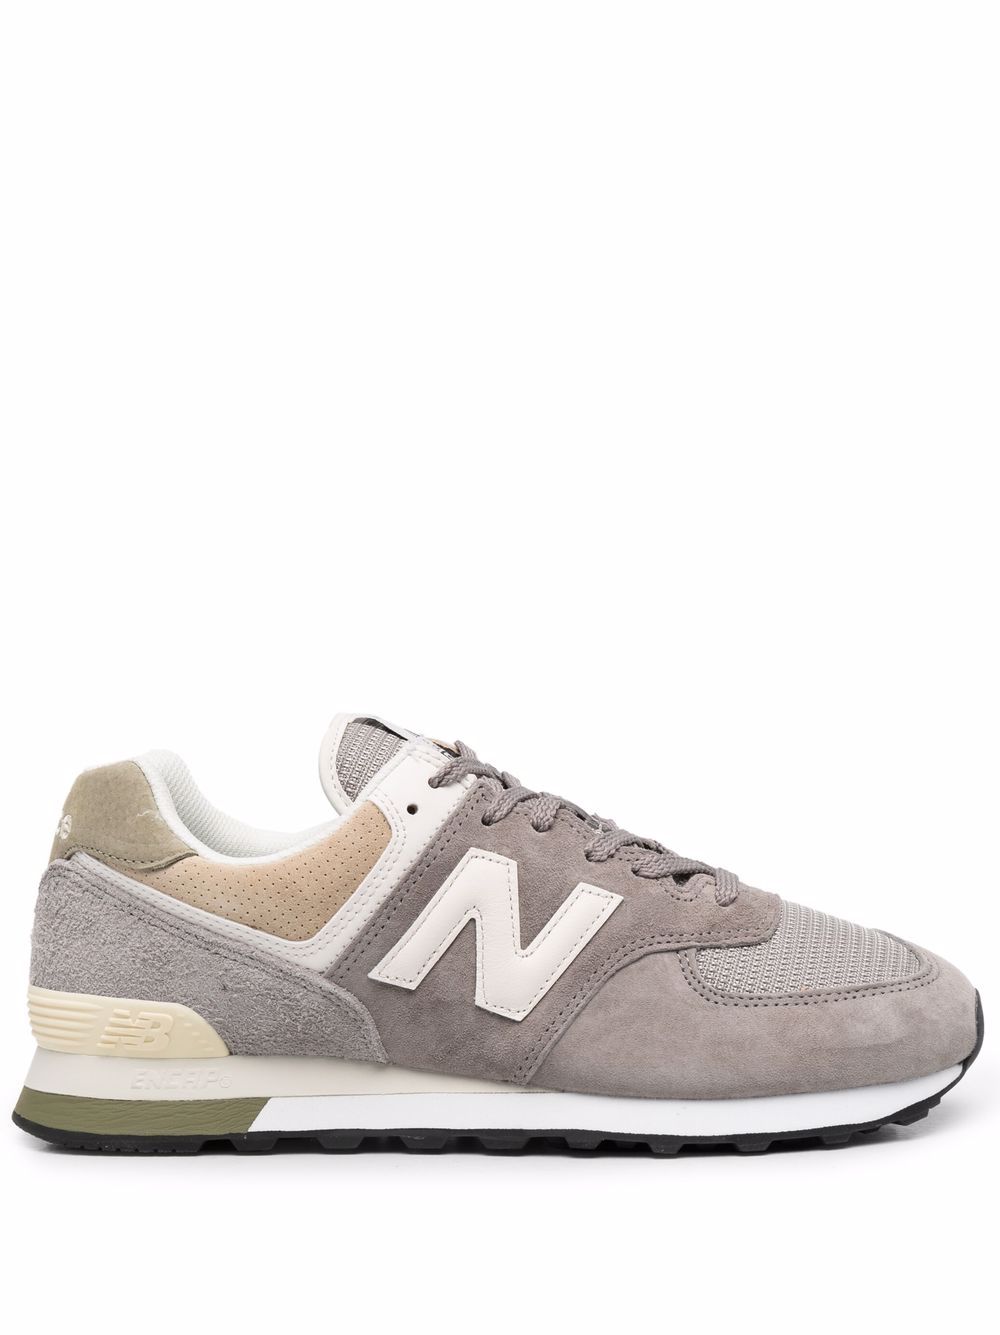 New Balance 574 lace-up sneakers - Grey von New Balance